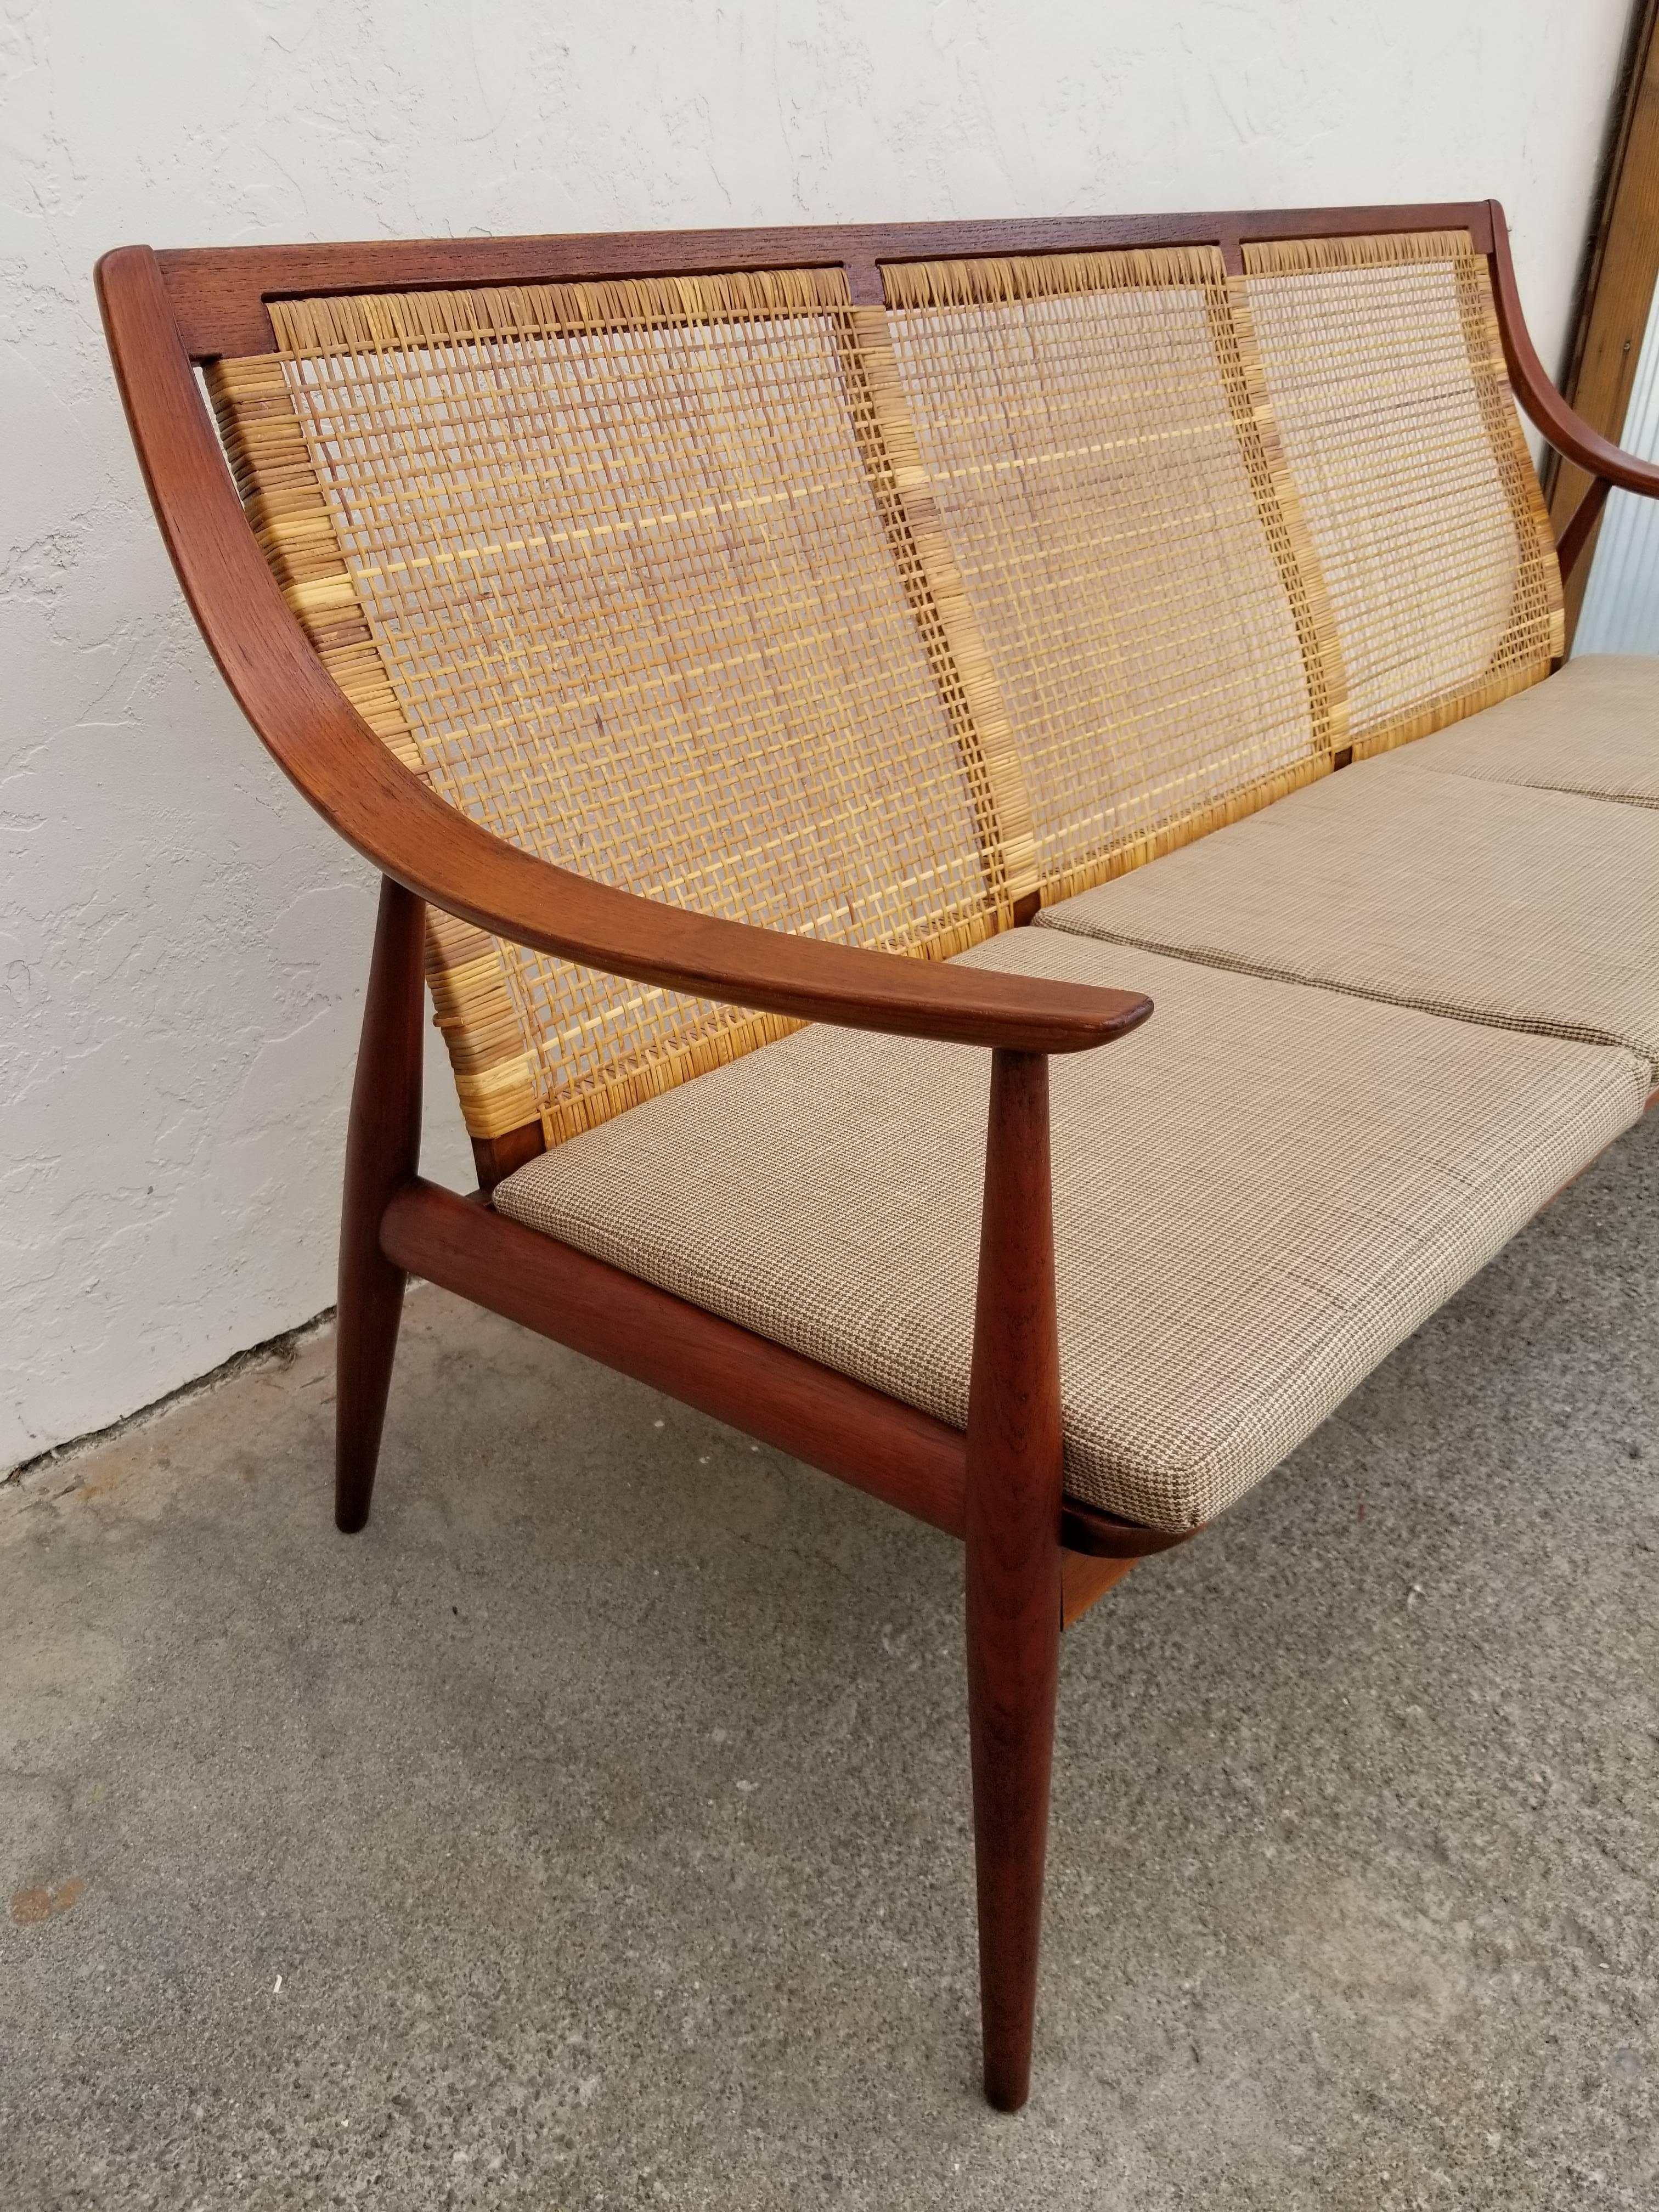 A nice example of this architectural and sculptural design by Peter Hvidt and Orla Mølgaard-Nielsen, circa 1960. Crafted in solid teak, original wicker back in excellent condition. Rich, deep color to teak frame, new upholstery recommended.